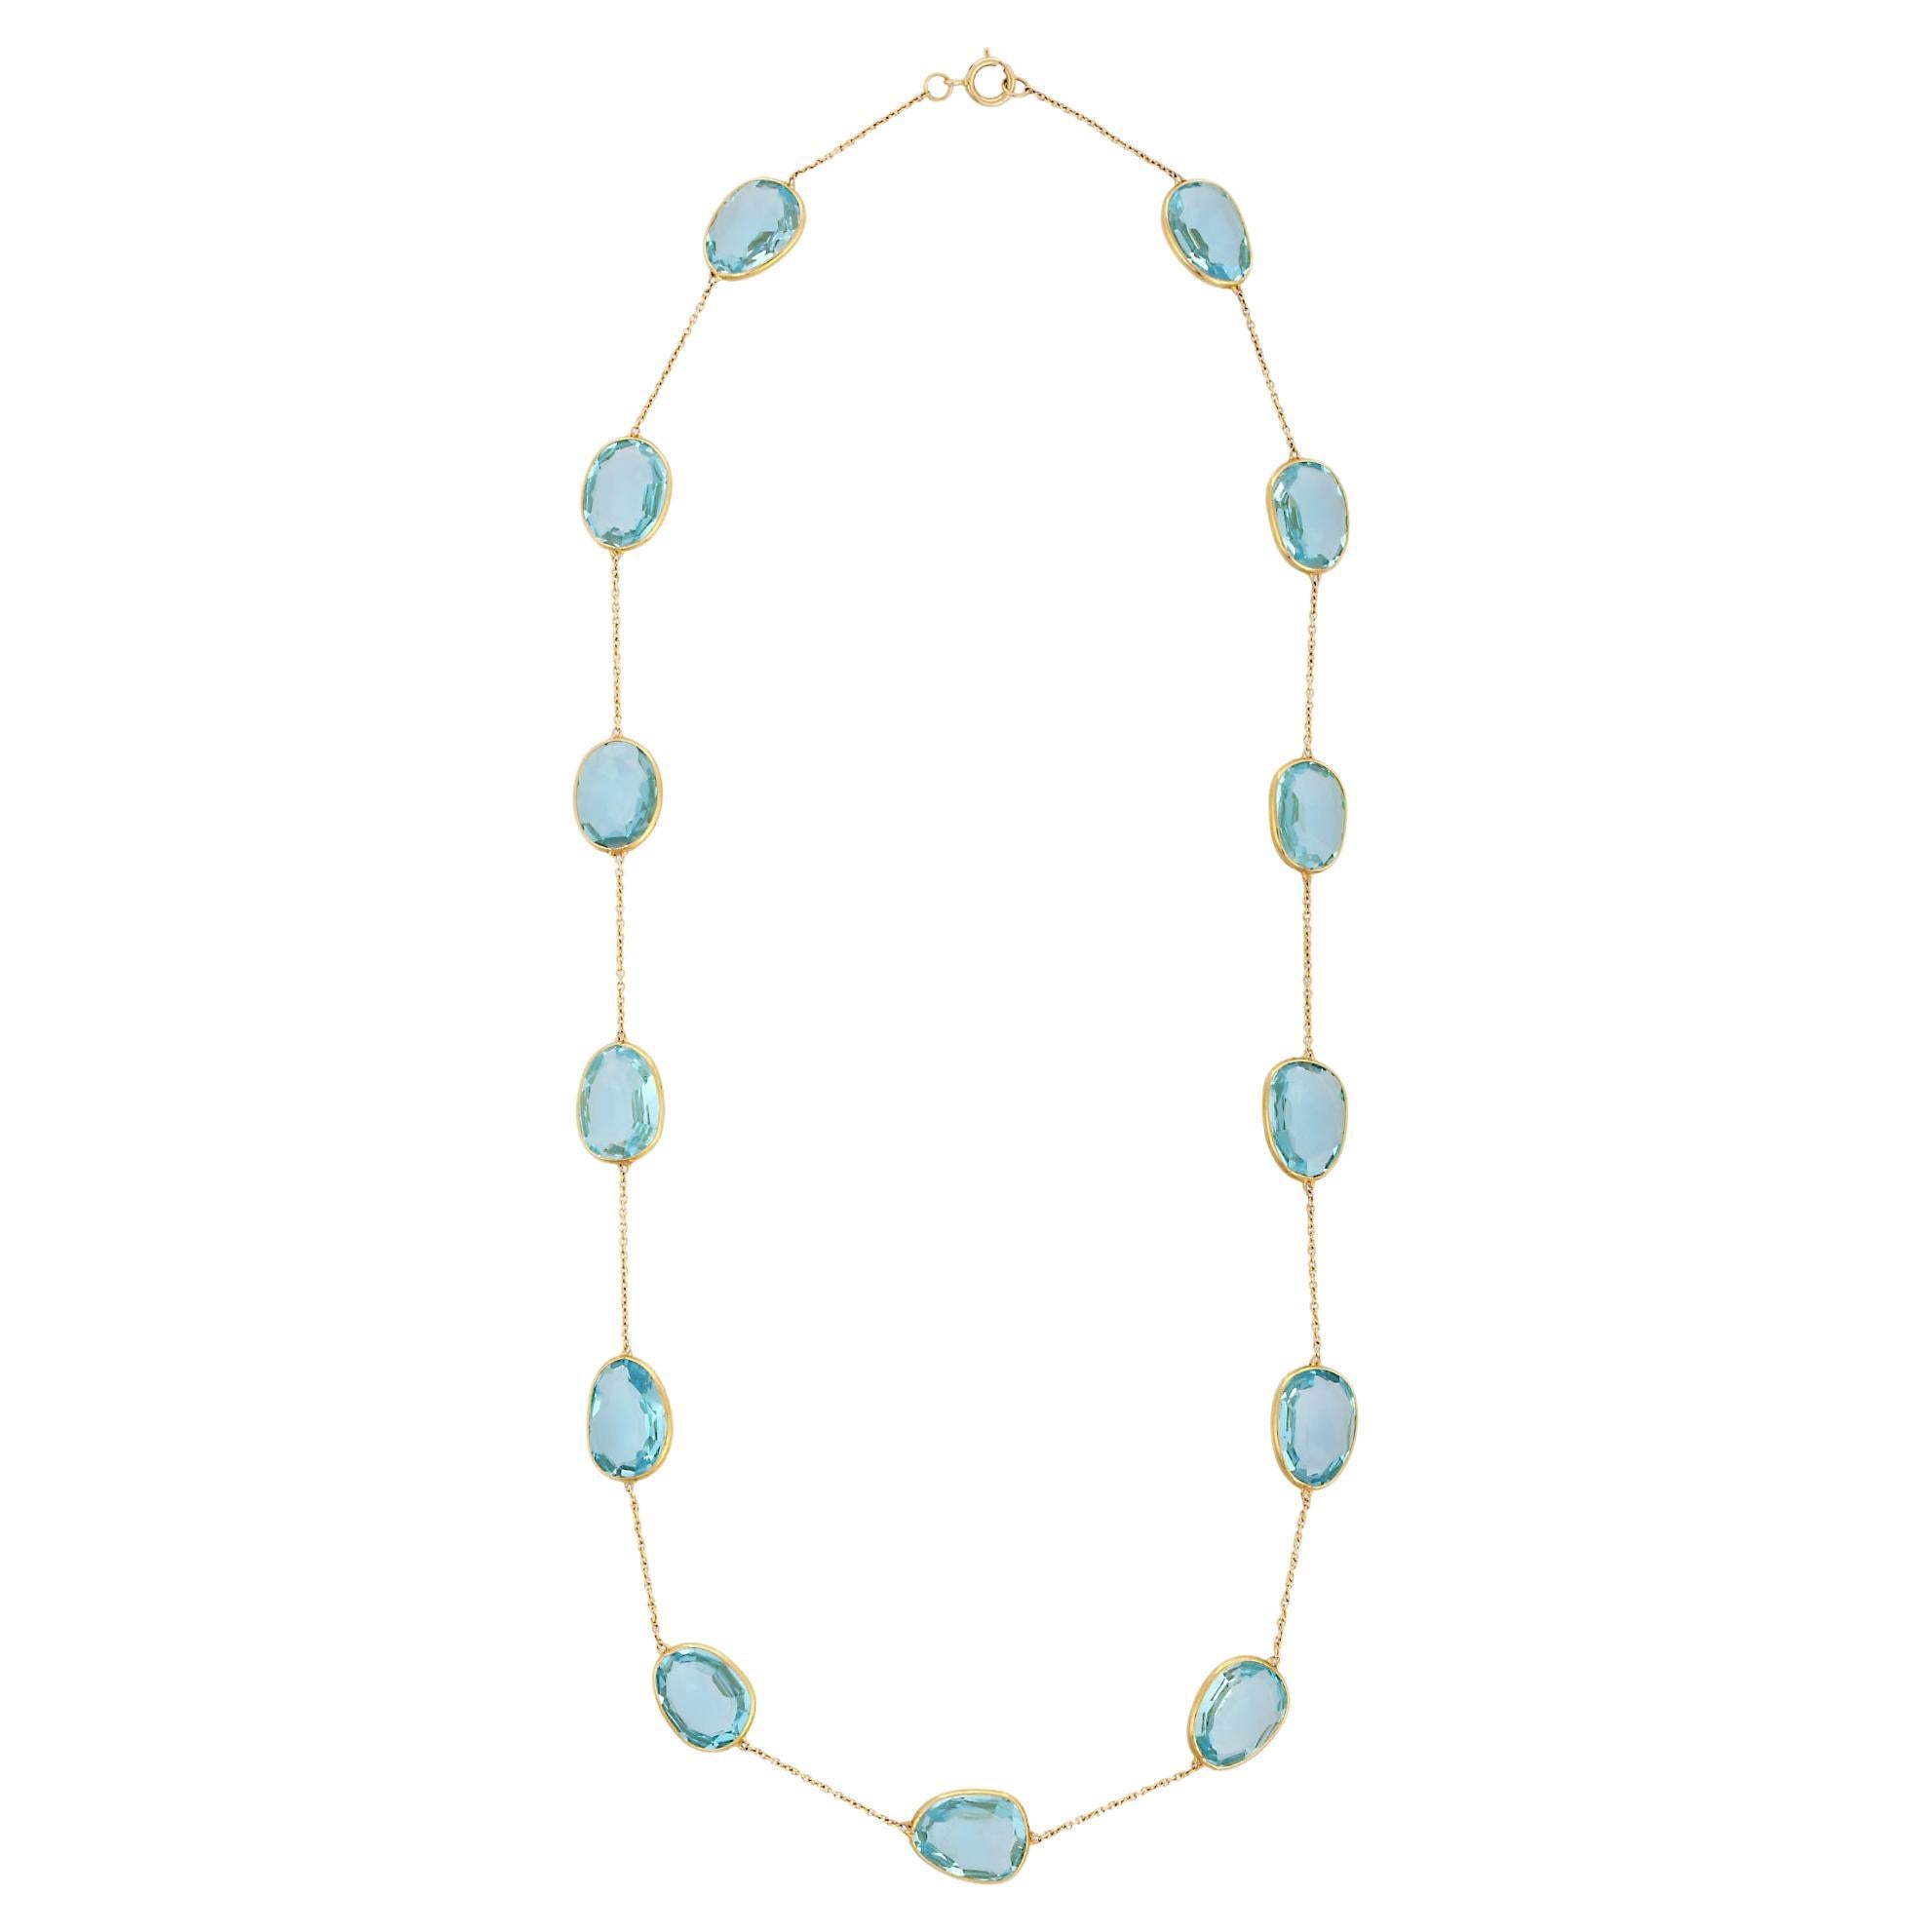 Delicate 47.55 Ct Blue Topaz Chain Necklace, 18K Yellow Gold Necklace